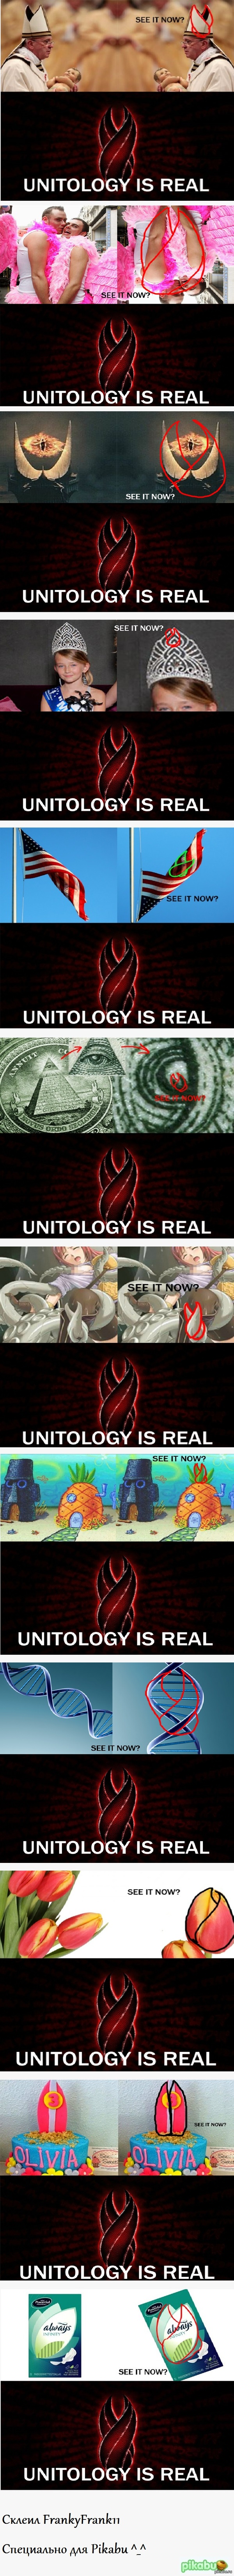 Unitology is real.   .